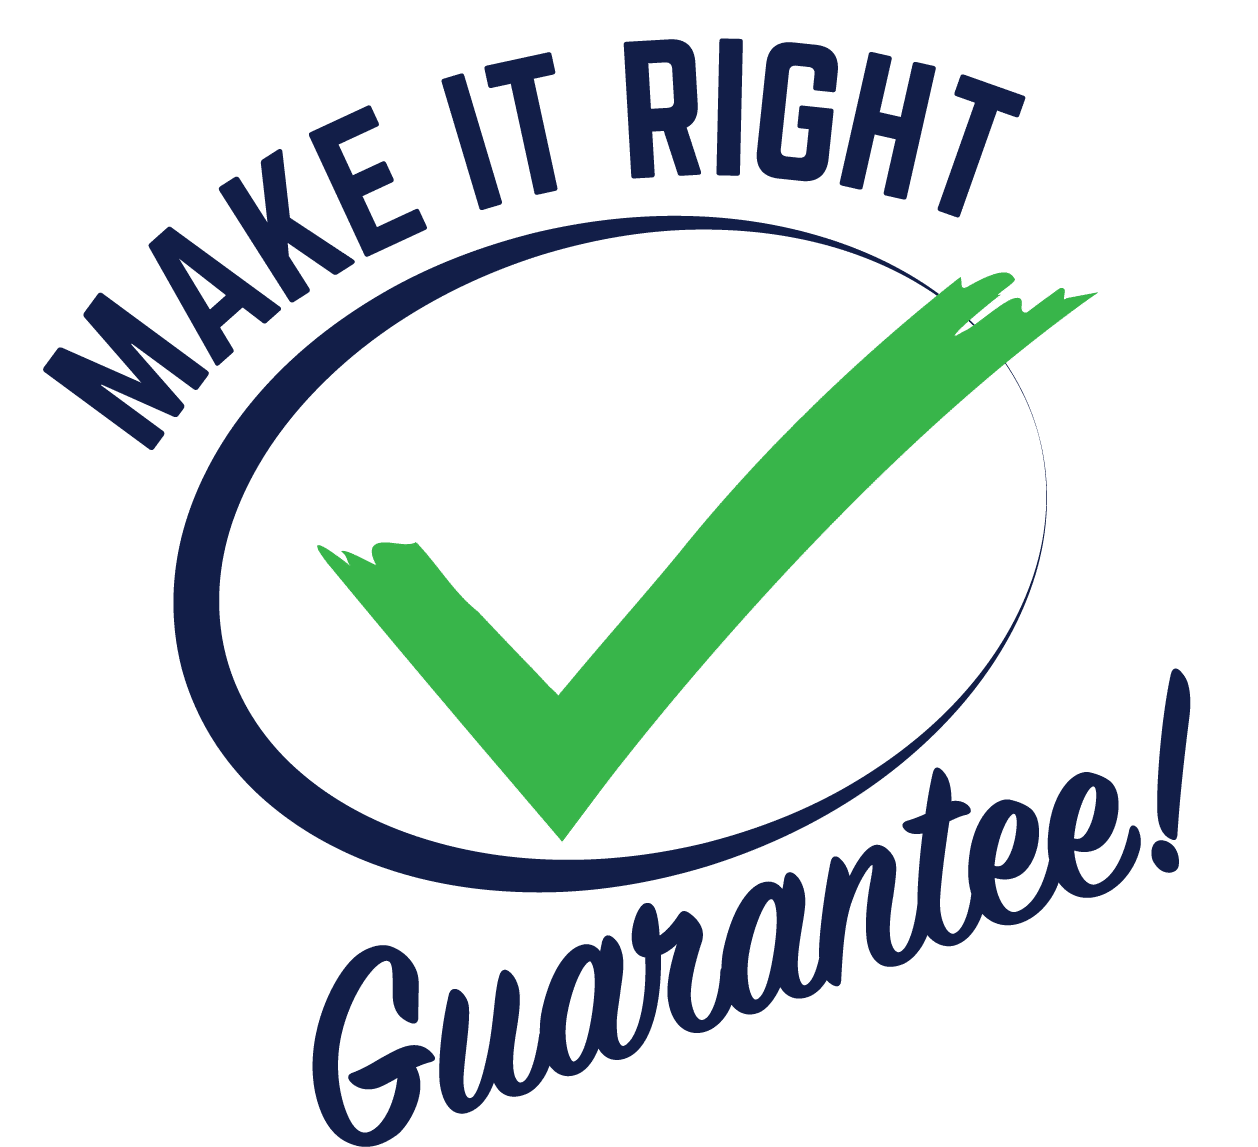 There is a logo showing a checkmark that is circled by text that says 'Make it Right: Guarantee!'